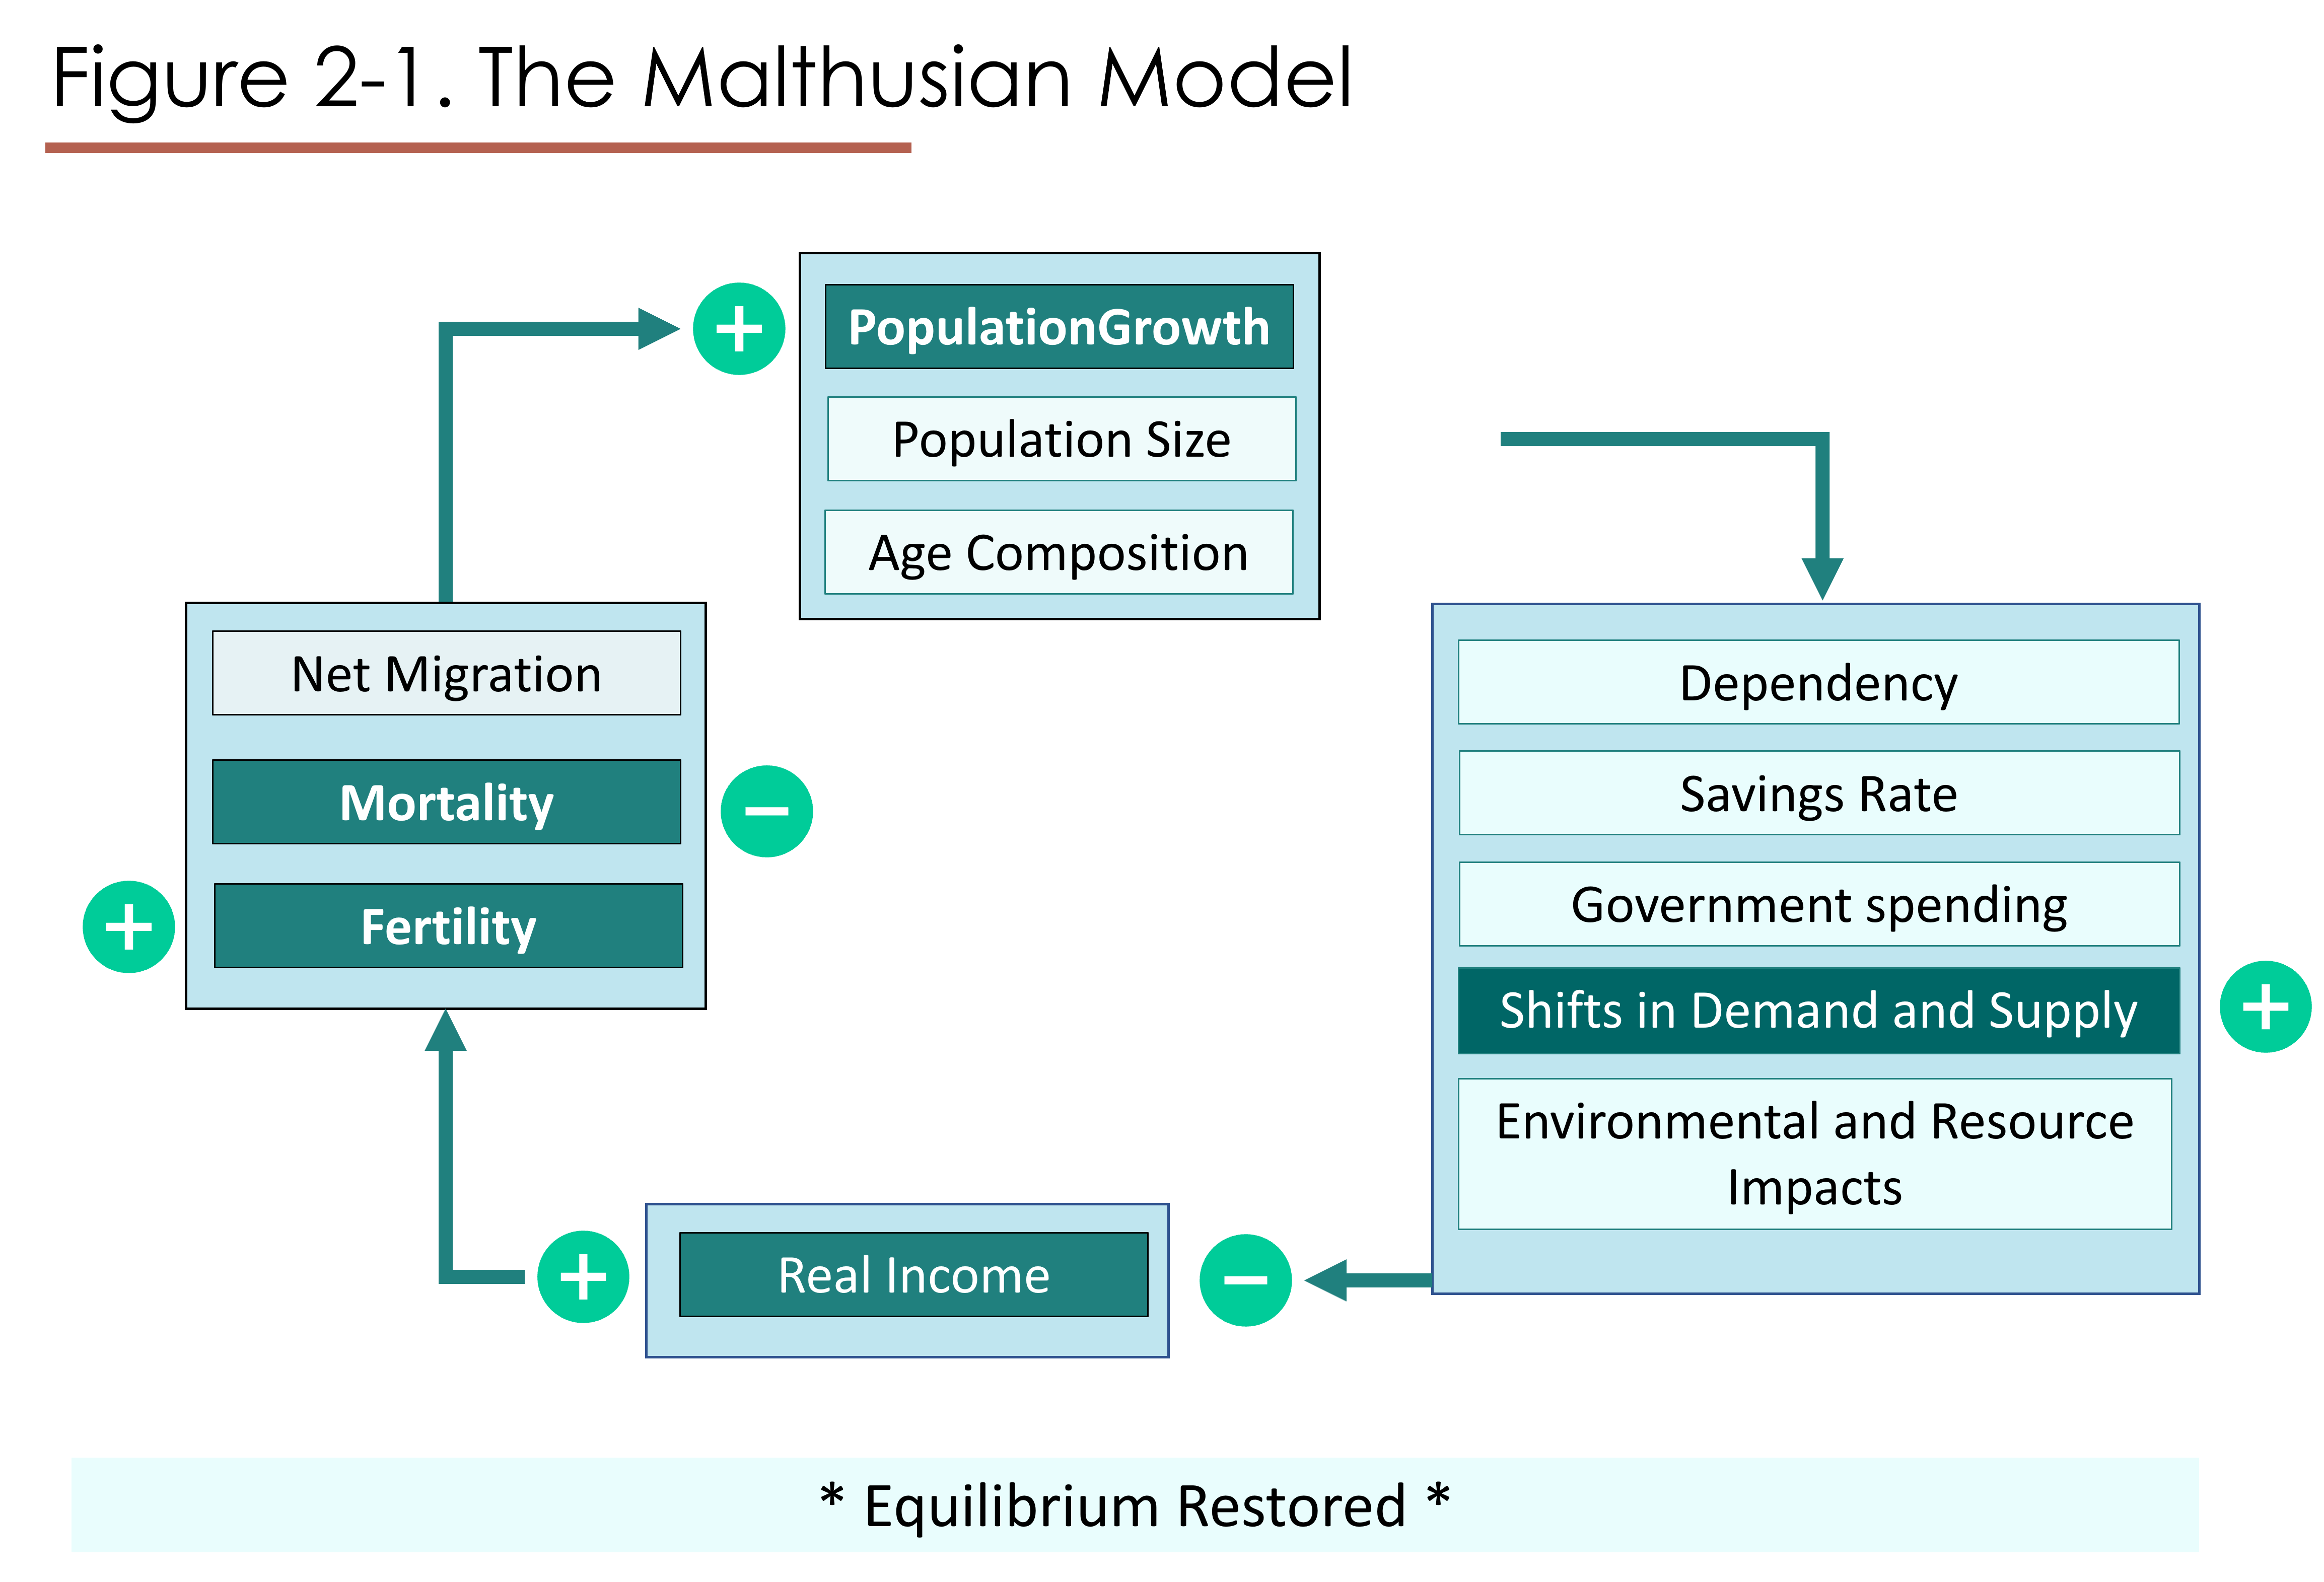 This is identical to Figure 1, except that detail has been added. Real Income is shown to be rising for some unknown reason, with the presence of a "+" sign beside it. Then we see a "+" sign beside "Fertility" and a negative sign beside Mortality. Then we see a plus sign beside population growth at twelve o'clock. At three o'clock we see that there are changes in demand and supply. Demand has increased but Supply is not able to increase. This causes Real Income Per Person (at six o'clock) to fall, undoing the initial increase.